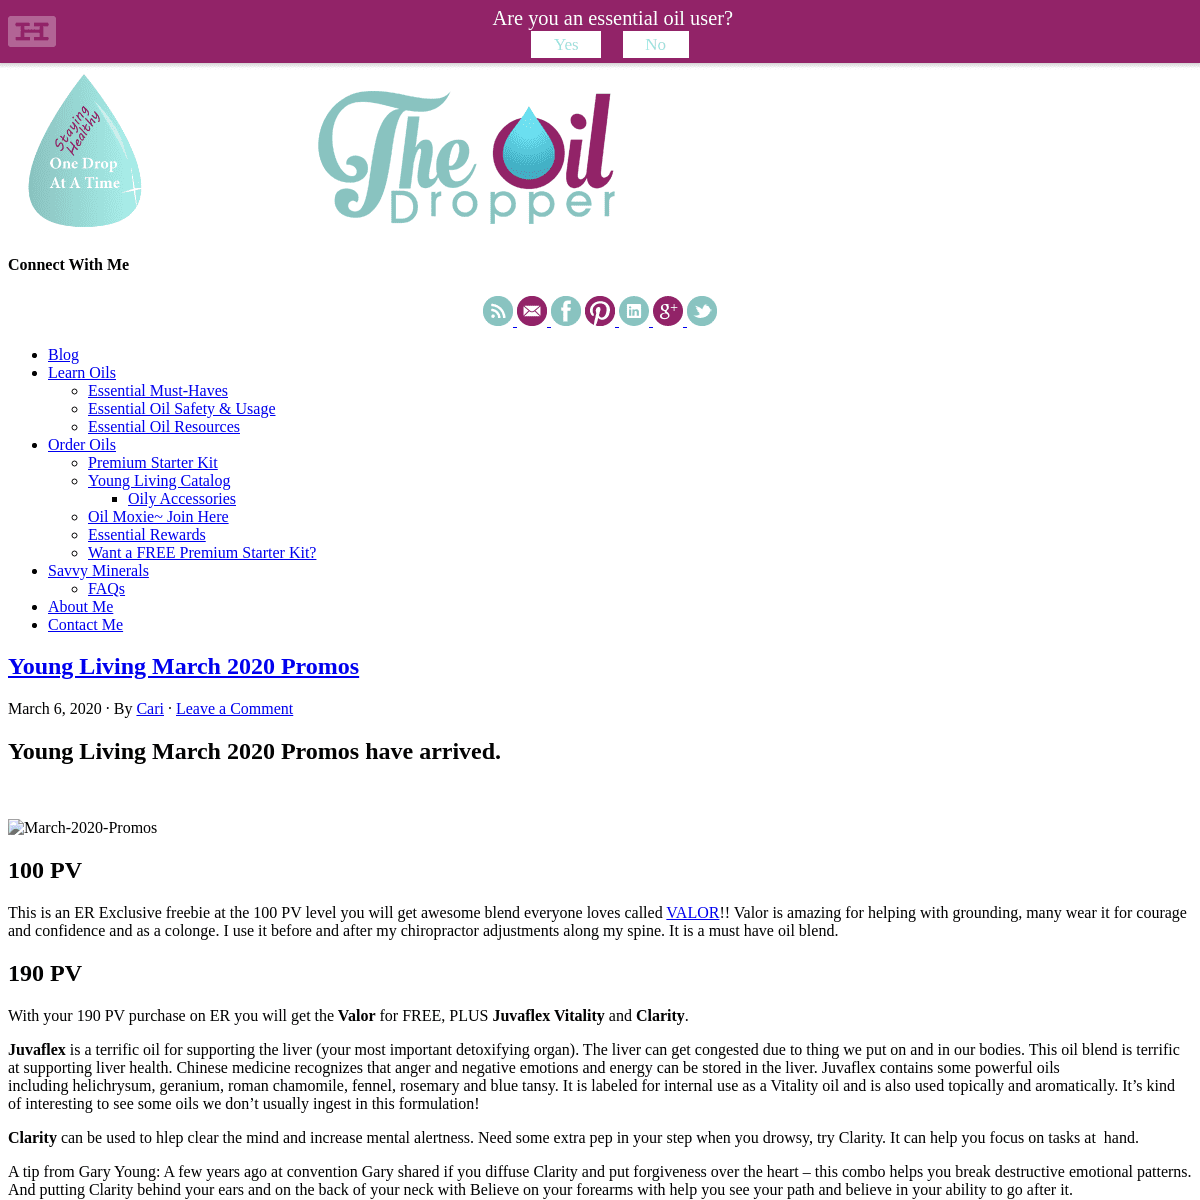 A complete backup of theoildropper.com